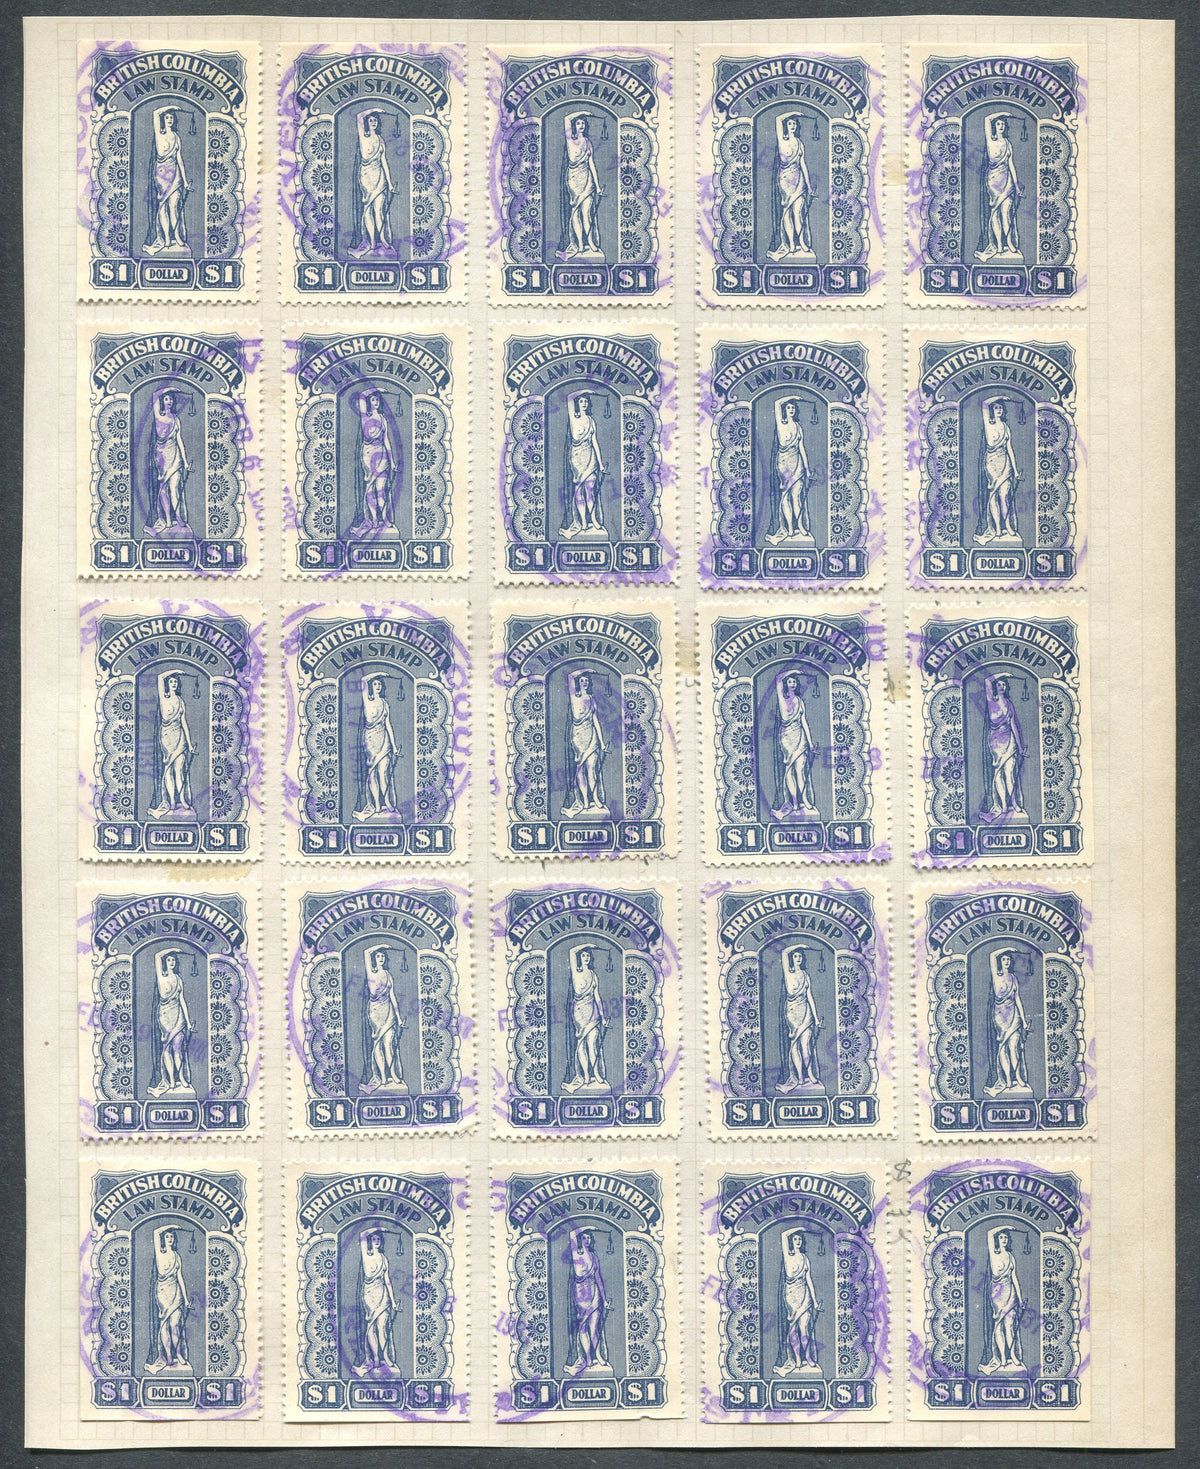 0035BC2010 - BCL35 - Used Reconstructed Sheet